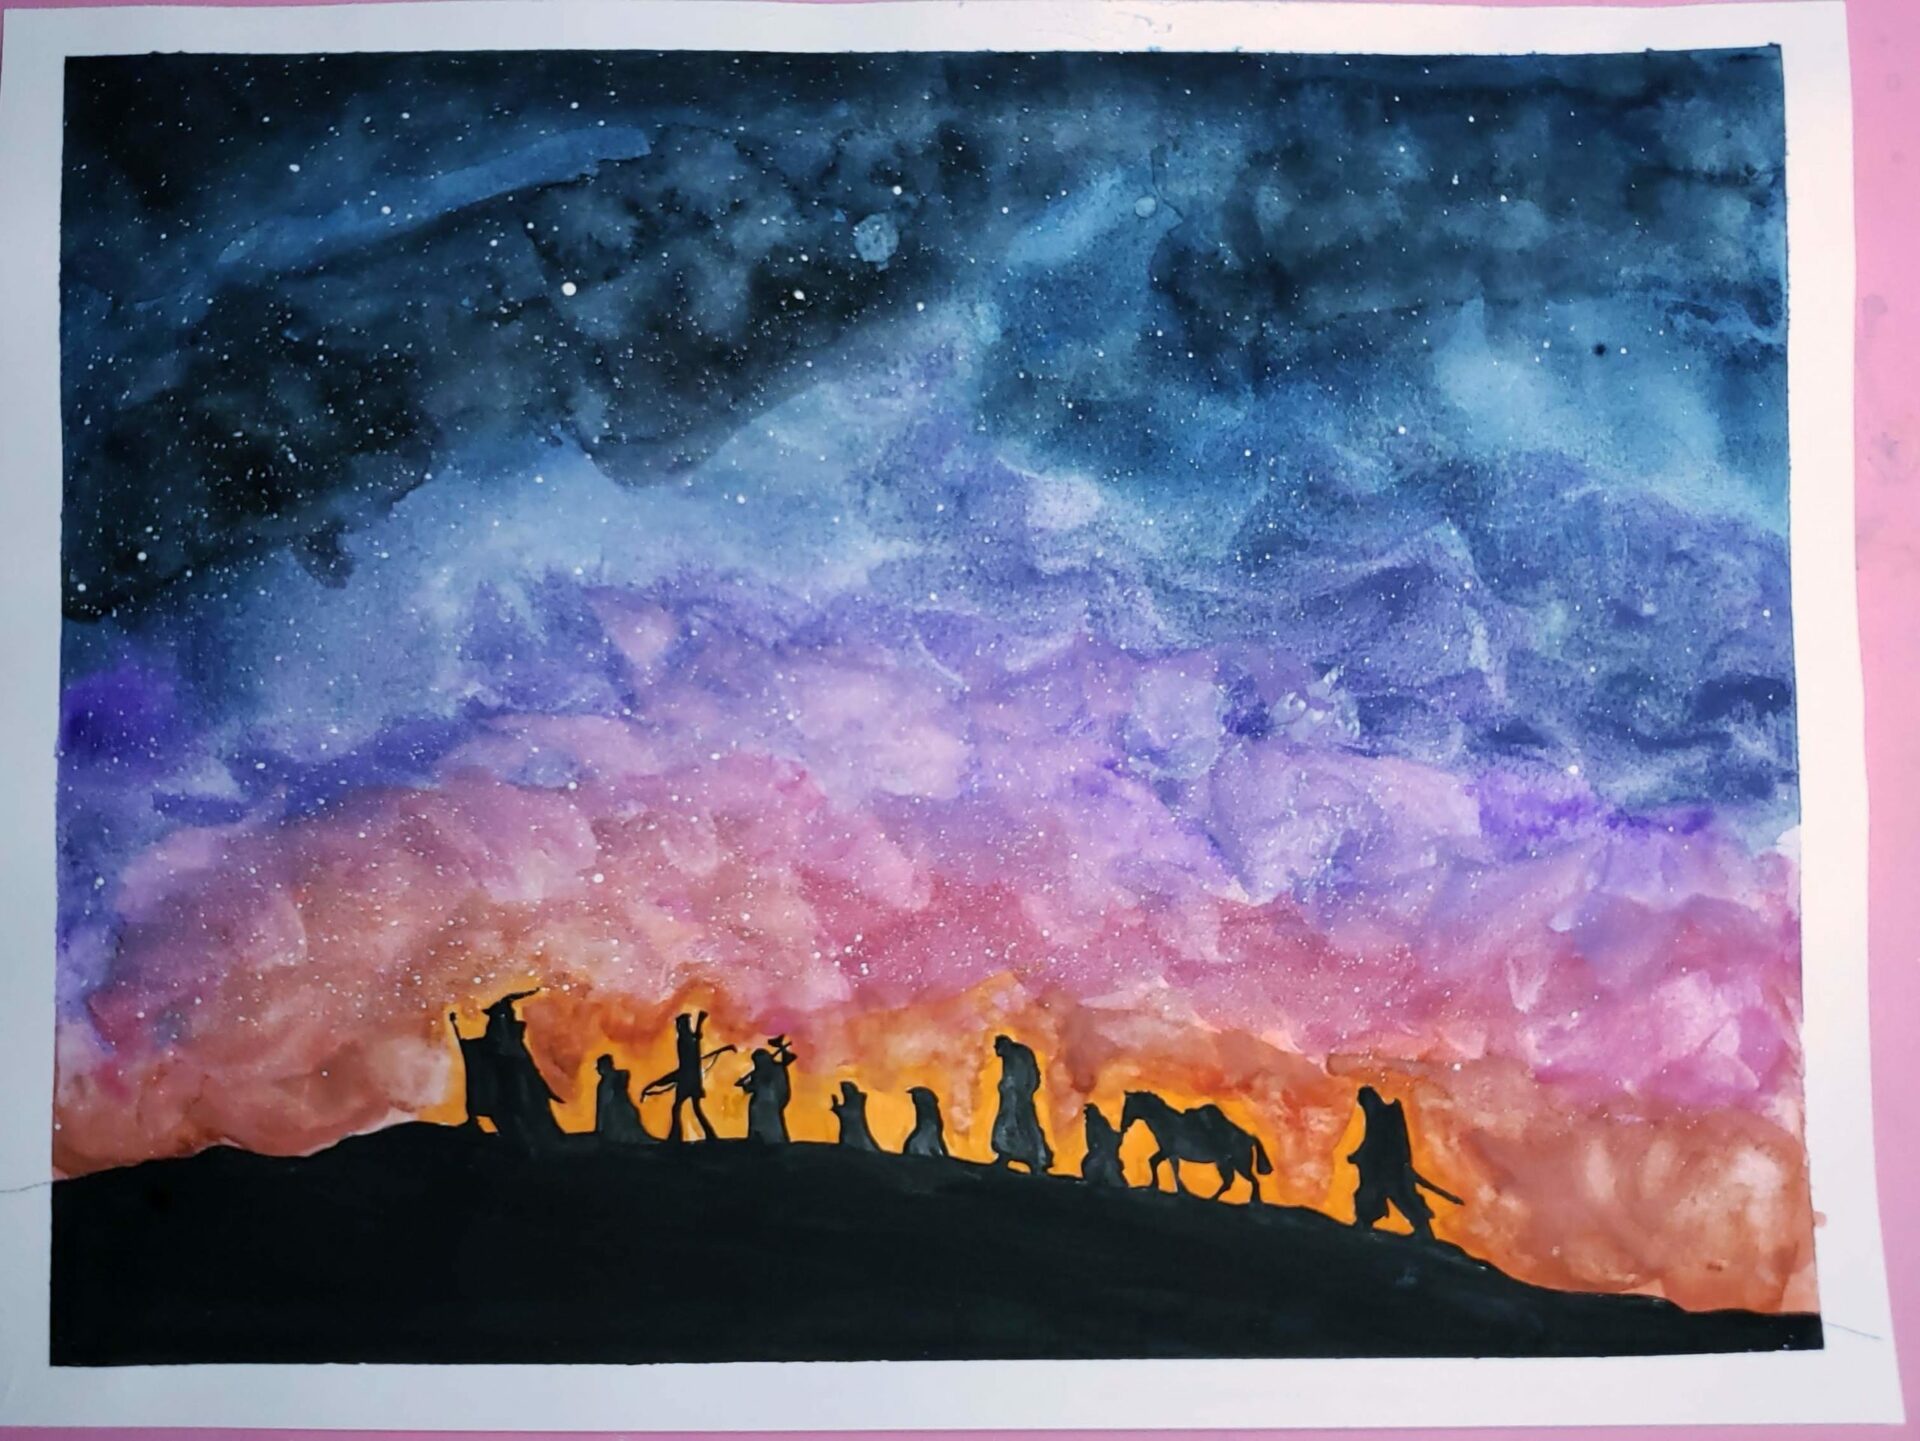 Watercolor painting depicting a starry, sunset sky, the characters from Lord of the Rings, the Fellowship of the Ring in silhouette.